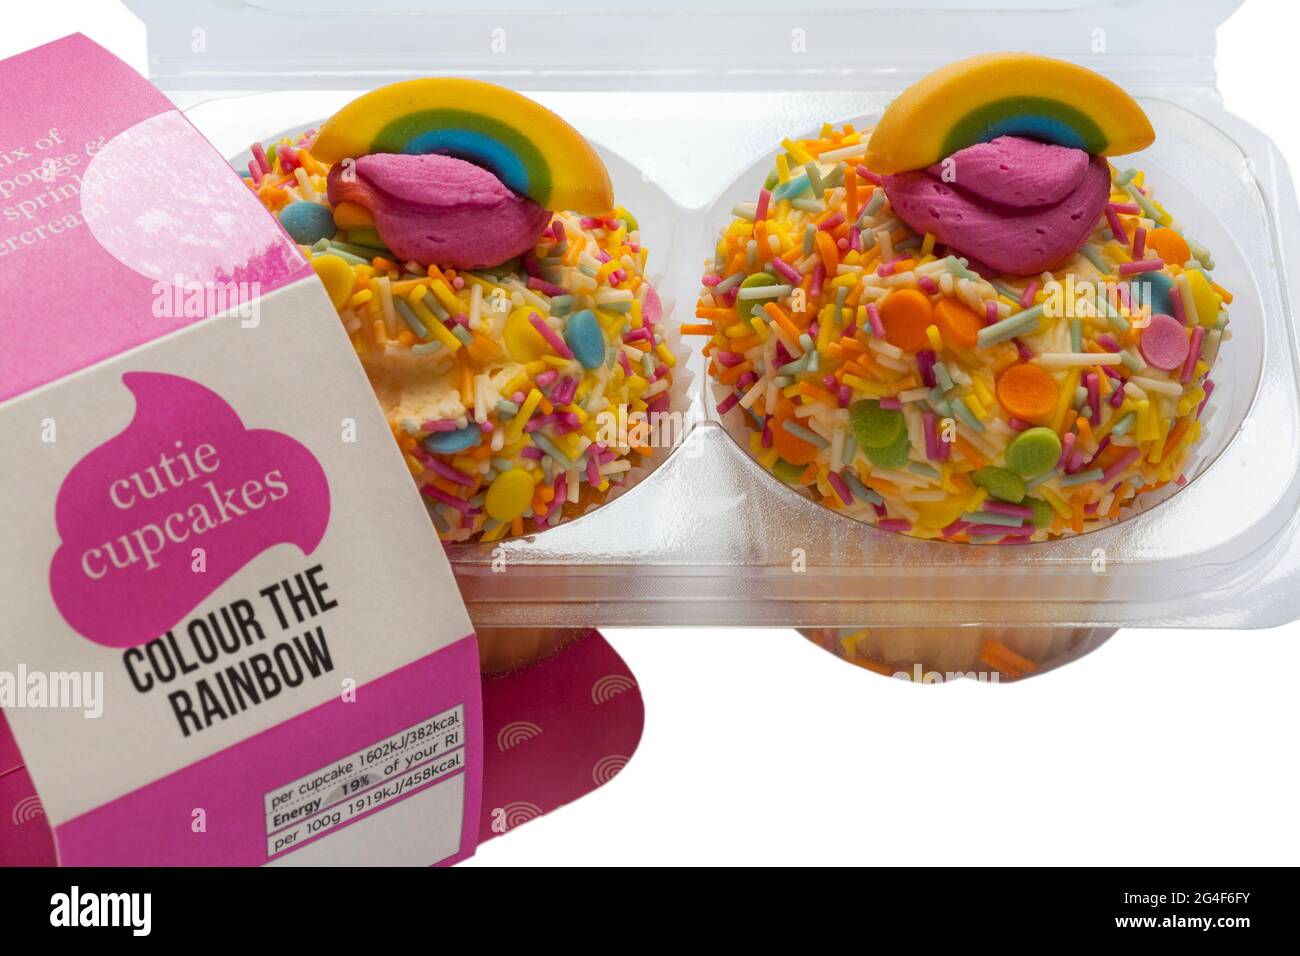 cutie cupcakes colour the rainbow from M&S set on white background Stock Photo